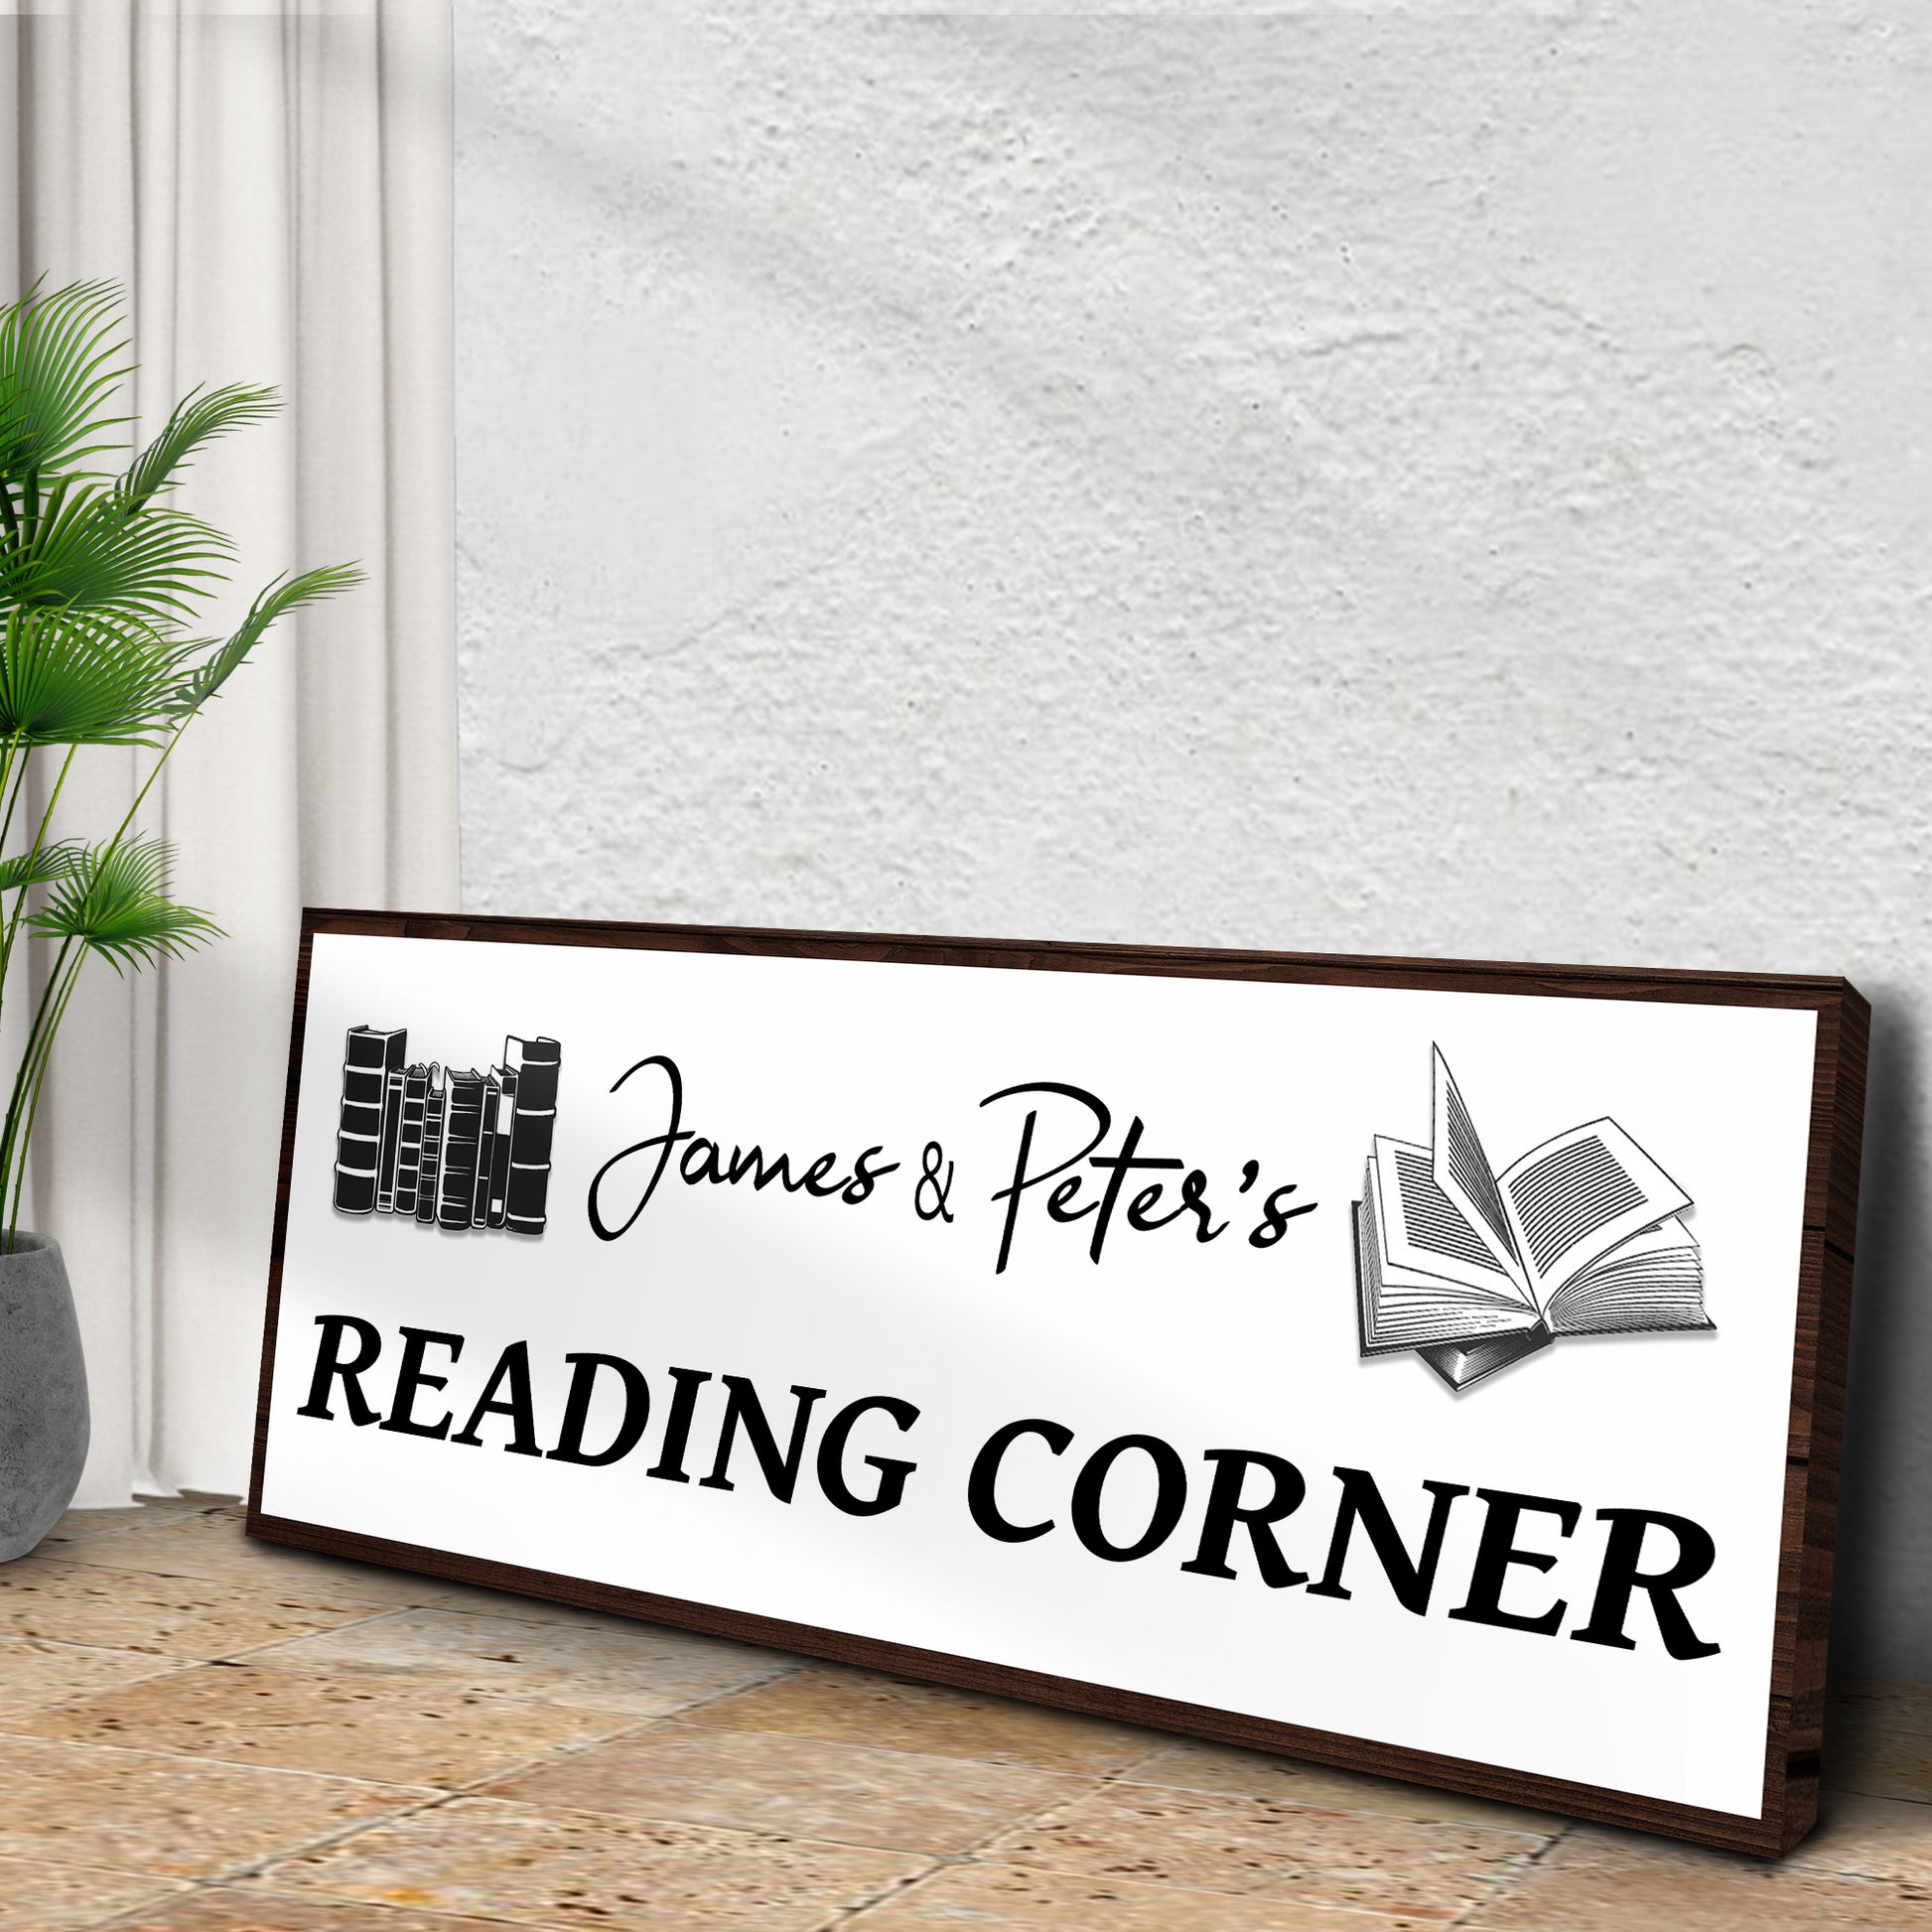 Reading Corner Sign Style 2 - Image by Tailored Canvases